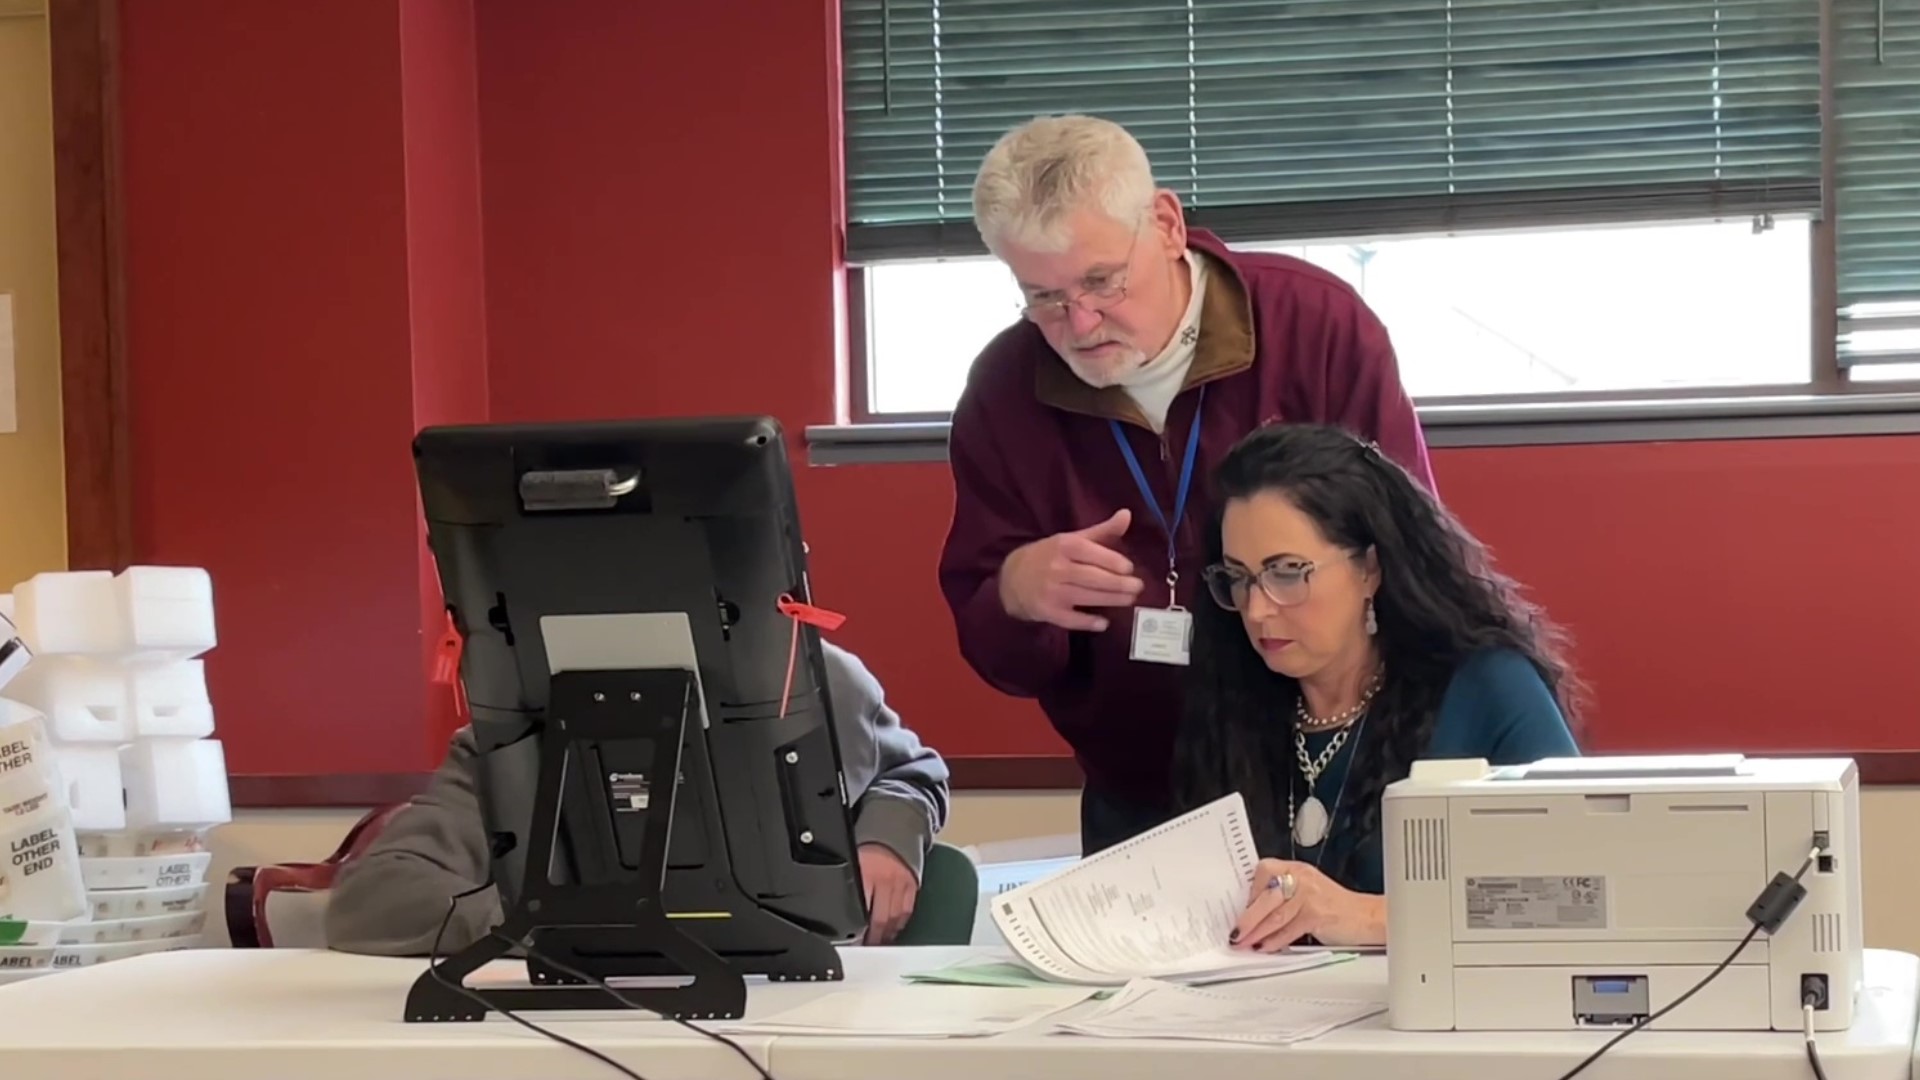 Bureau of Elections officials and volunteers are sorting through provisional ballots filed when polling places in the county ran out of paper.